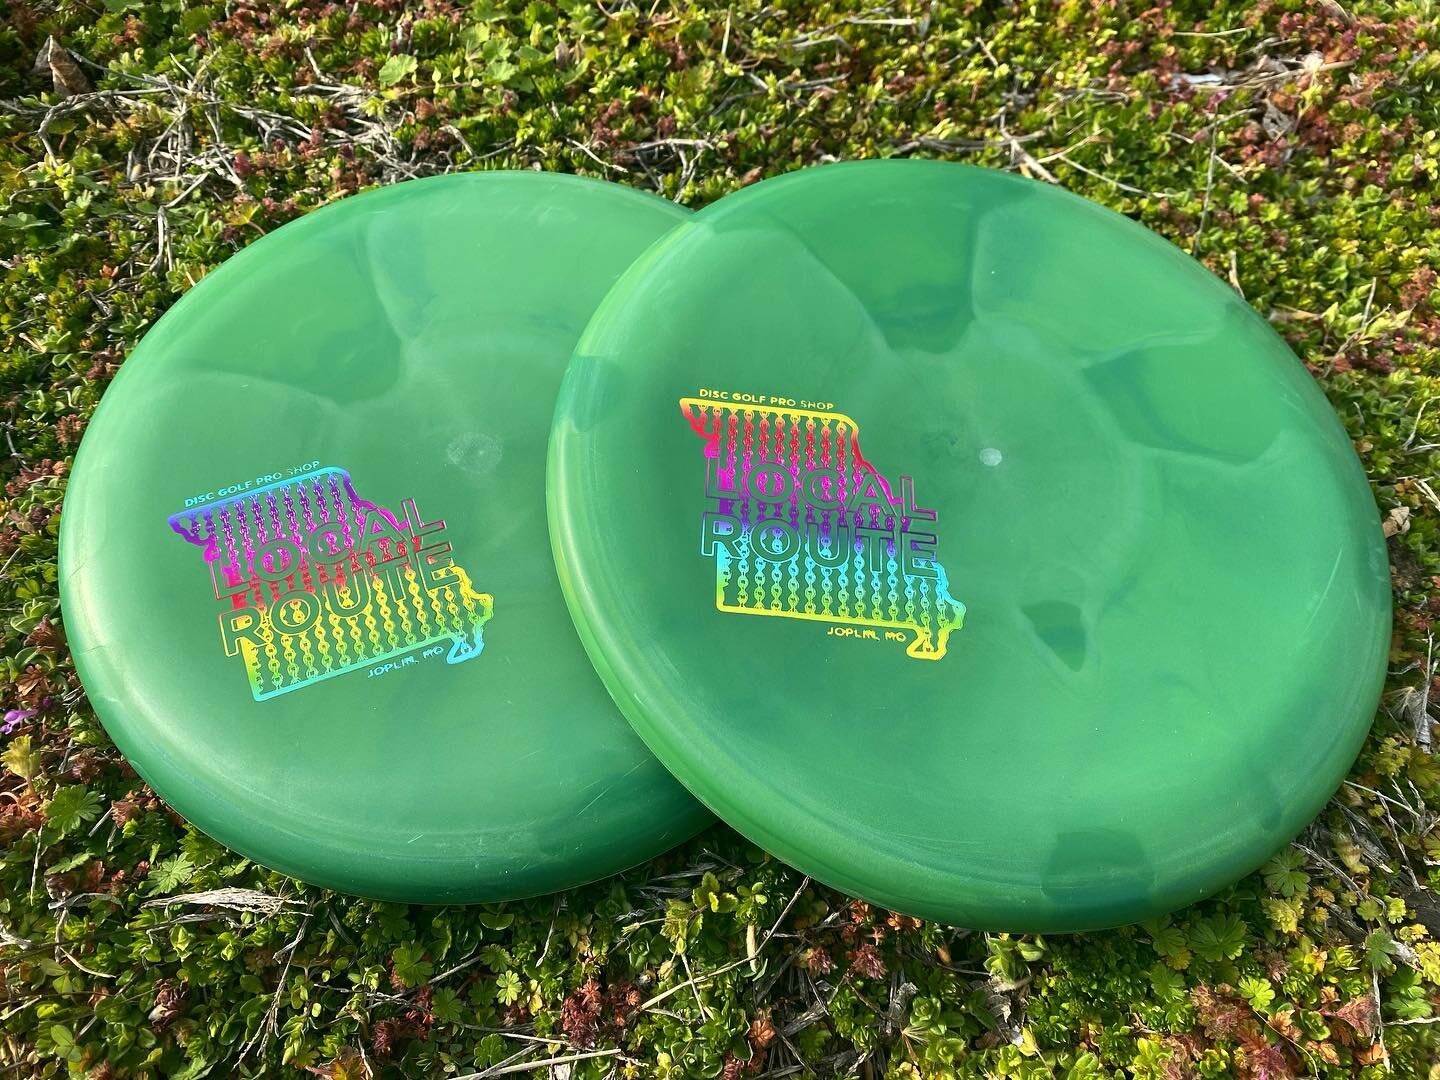 We&rsquo;re a little late for St. Patty&rsquo;s, but check out these pretty Passports for @localroute 

#fullturndiscs #prodiscus #gatewaydiscsports #discgolf #discgolflife #discgolfeveryday #discgolfdaily #discgolfnation #green #slimyslime